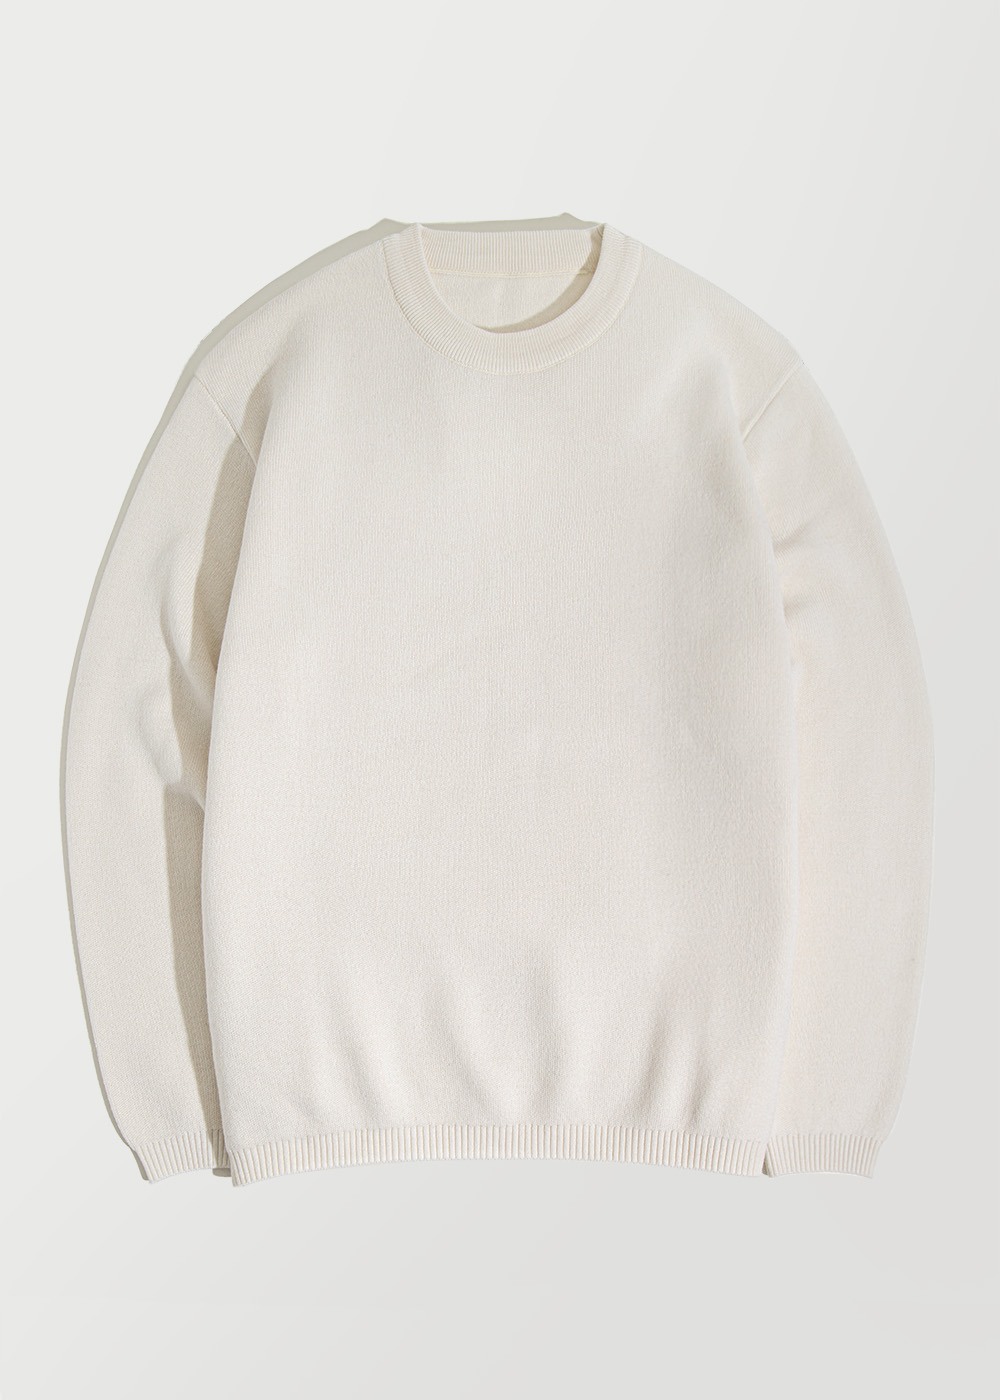 Wool Blended Casual Crewneck Knit _ raw white